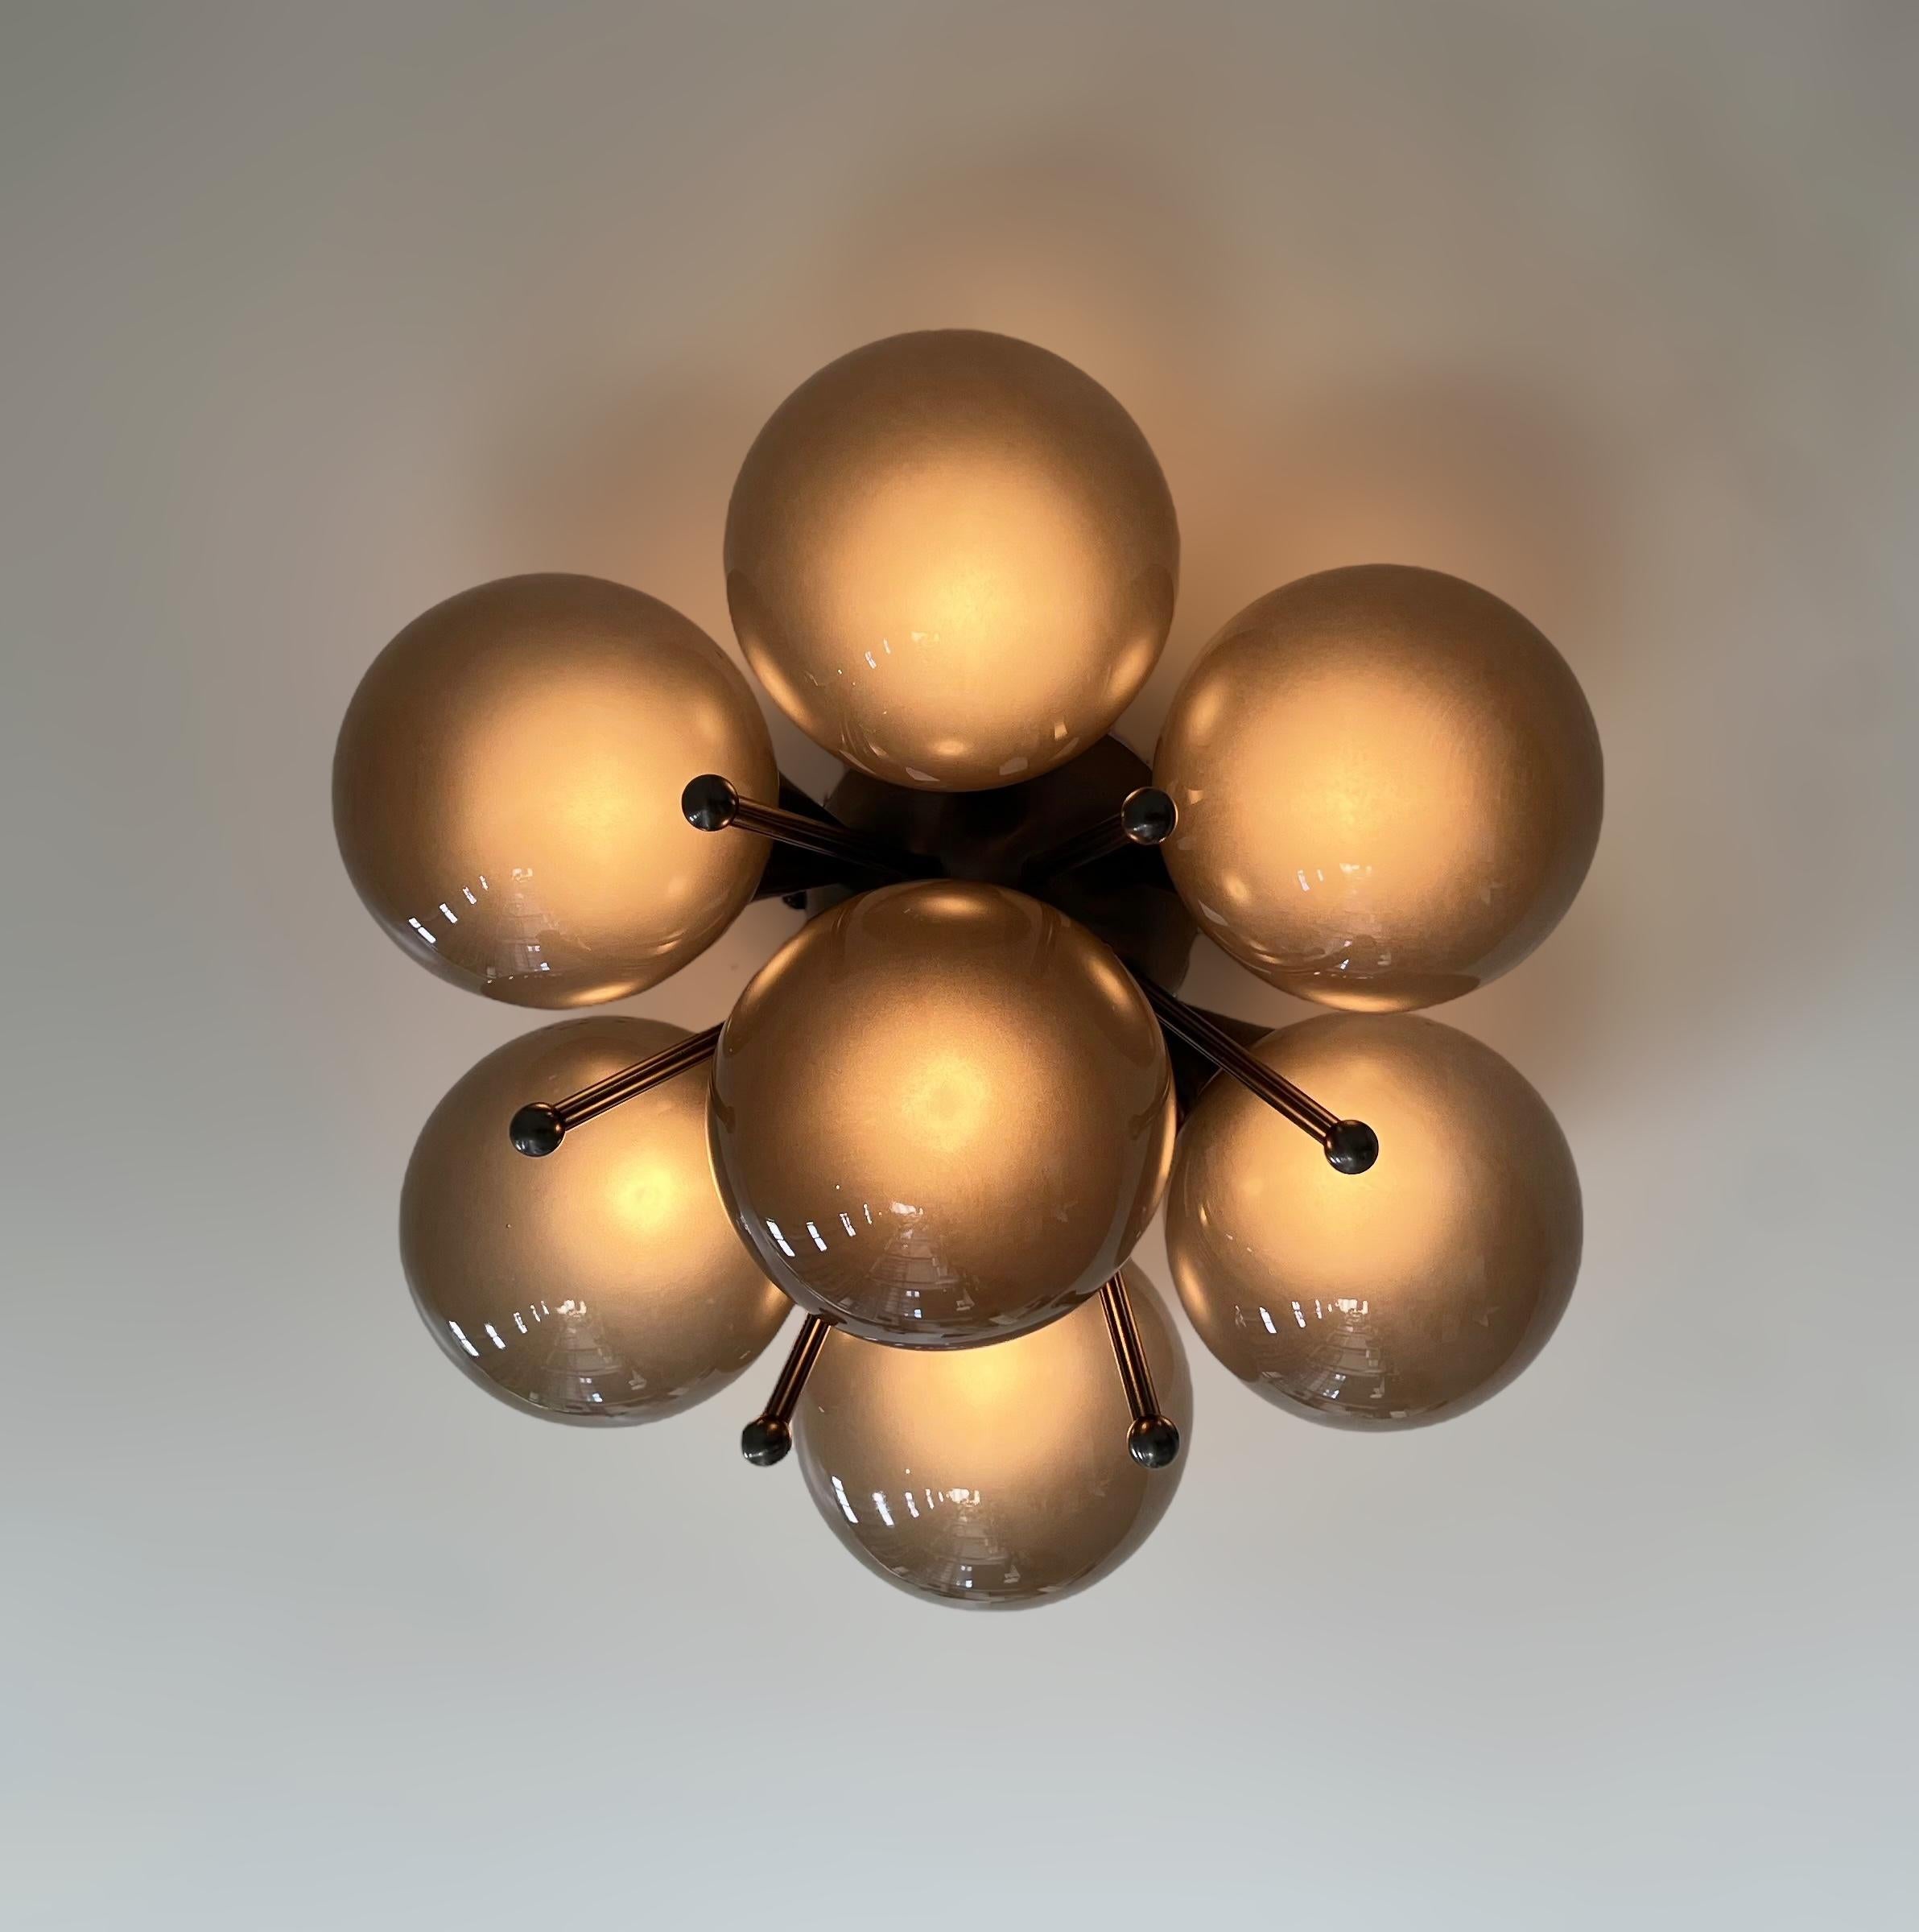 Sakura Flush Mount / Sconce by Fabio Ltd In New Condition For Sale In Los Angeles, CA